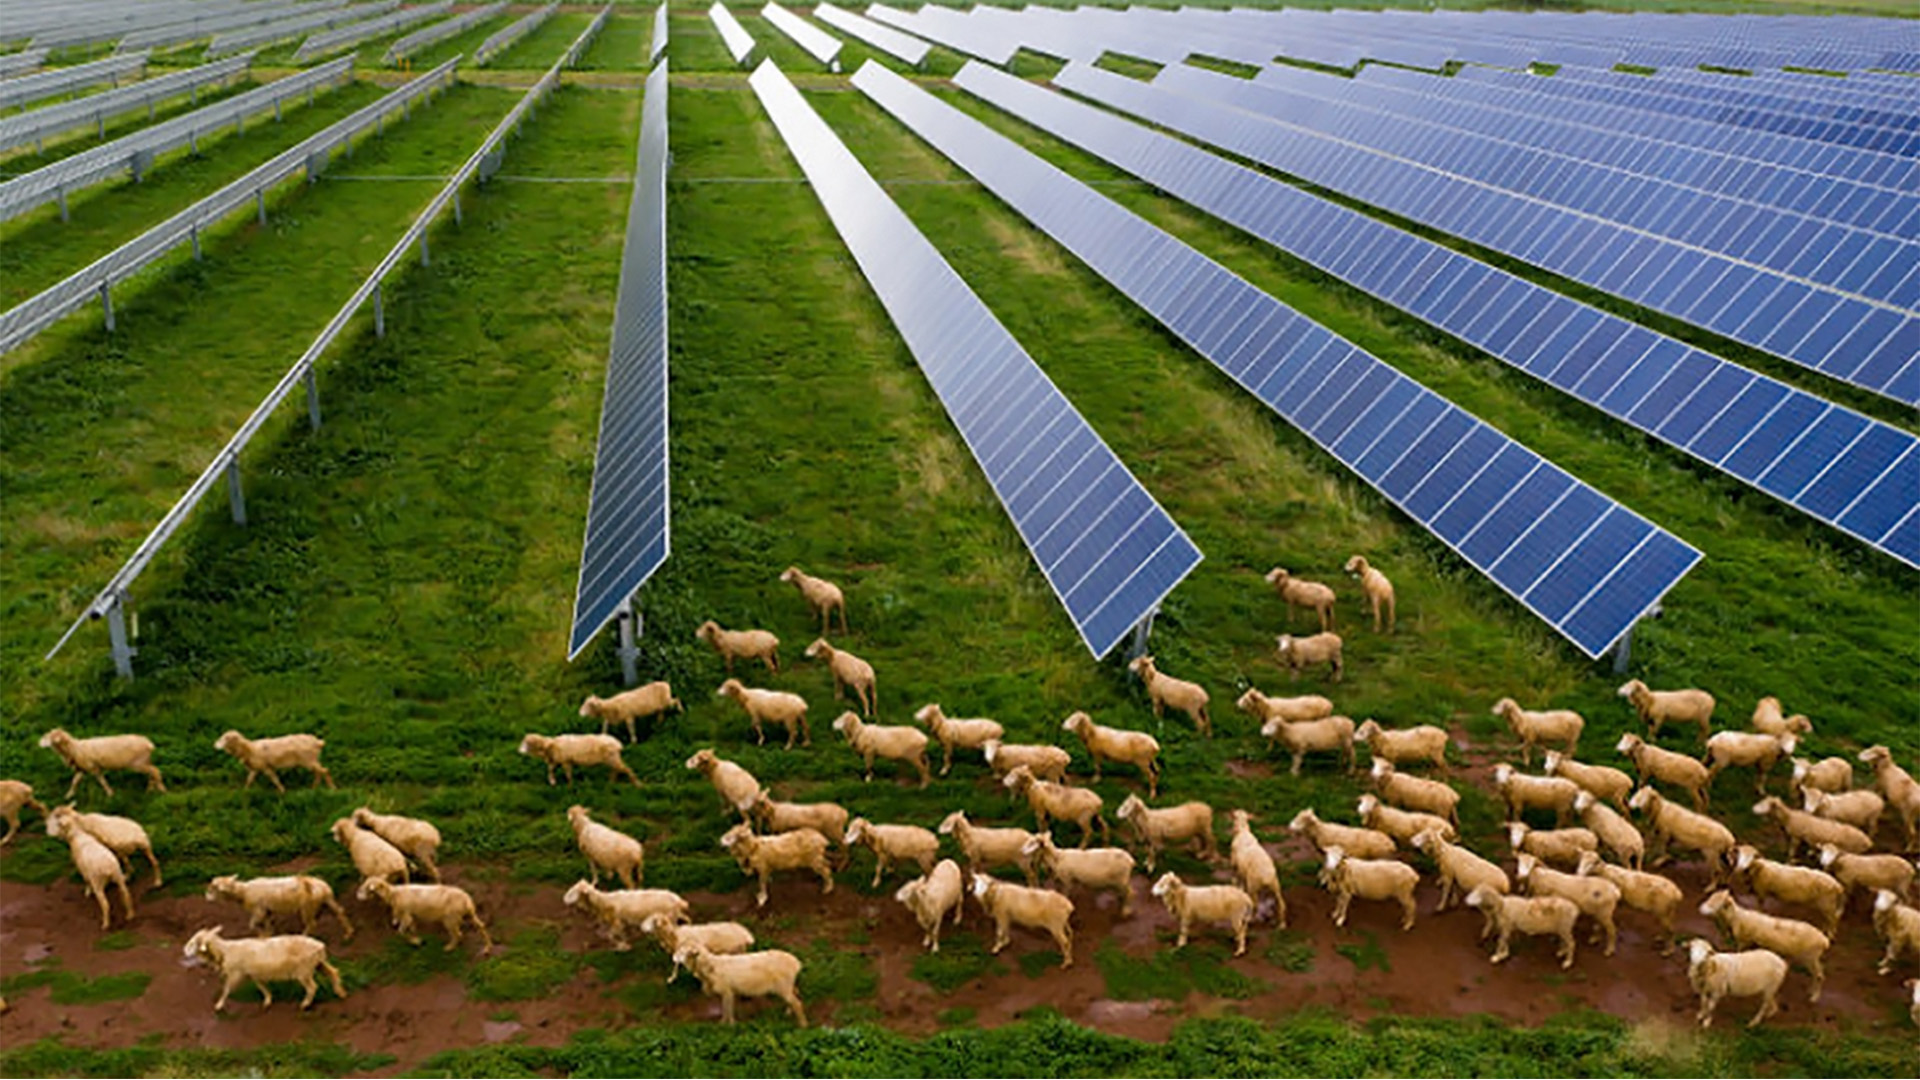 Sheep grazing under solar panels with Array trackers.